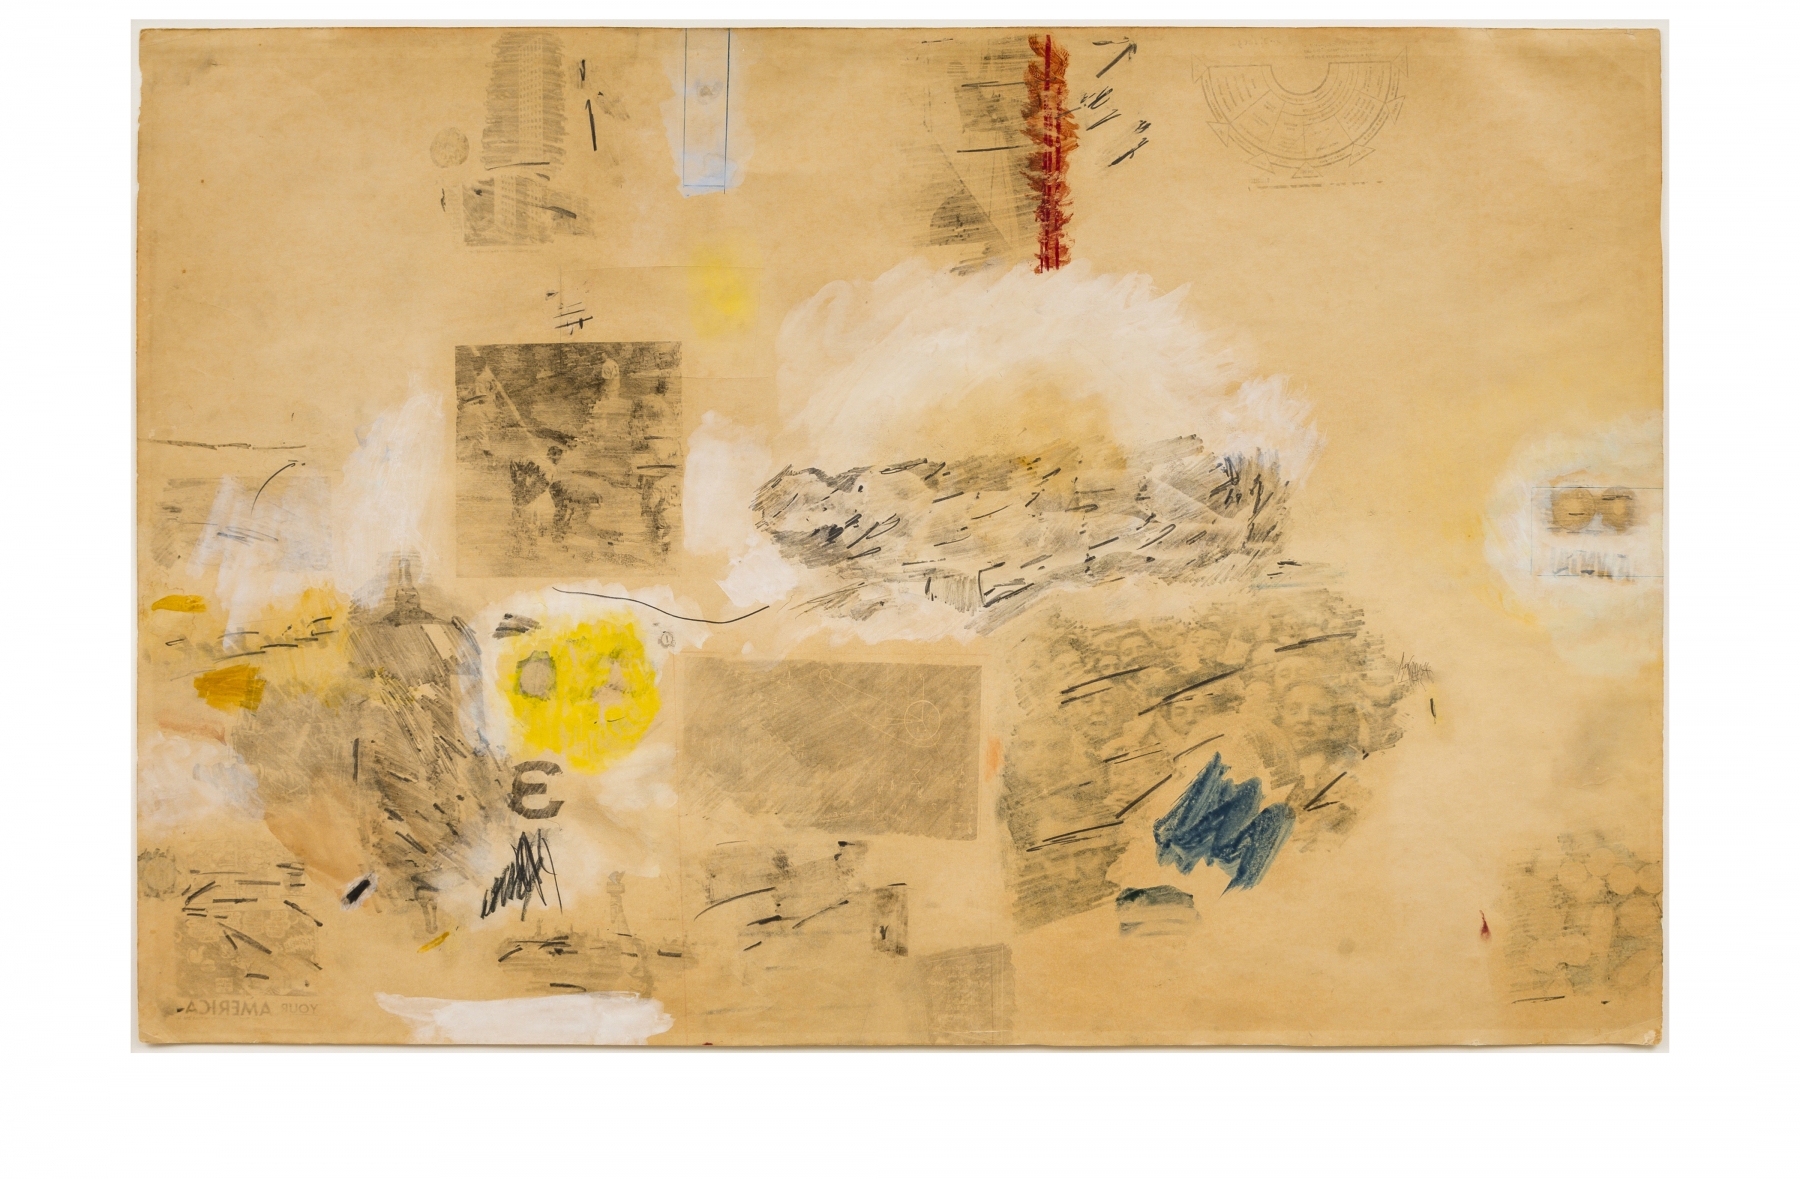 ROBERT RAUSCHENBERG&nbsp;(1925-2008)
&nbsp;

A-Muse
1958
combine drawing of solvent transfer, graphite, transparent&nbsp;and opaque watercolor, and oil pastel on buff wove paper
23 5/8 x 35 1/2 inches
&nbsp;&nbsp;(60 x 90.2 cm)

signed and dated verso lower right: &quot;RAUSCHENBERG 1958&quot;


&nbsp;

INQUIRE